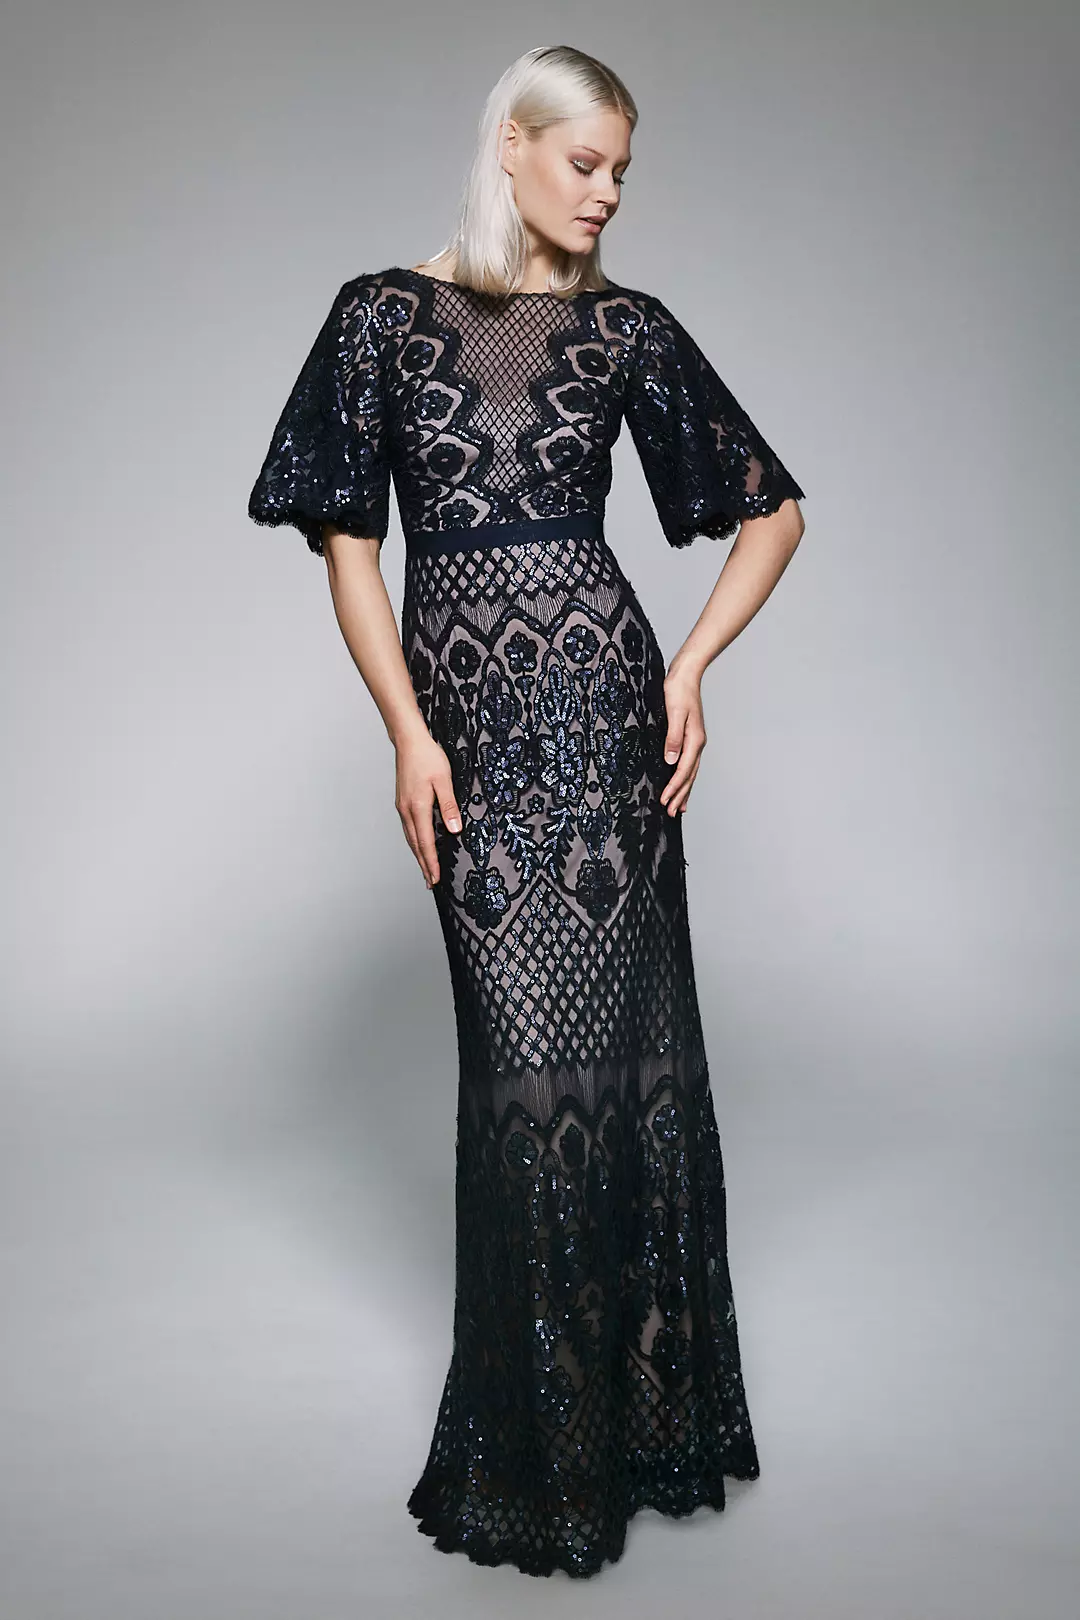 Swigert Elbow-Sleeve Sequin Lace Sheath Gown Image